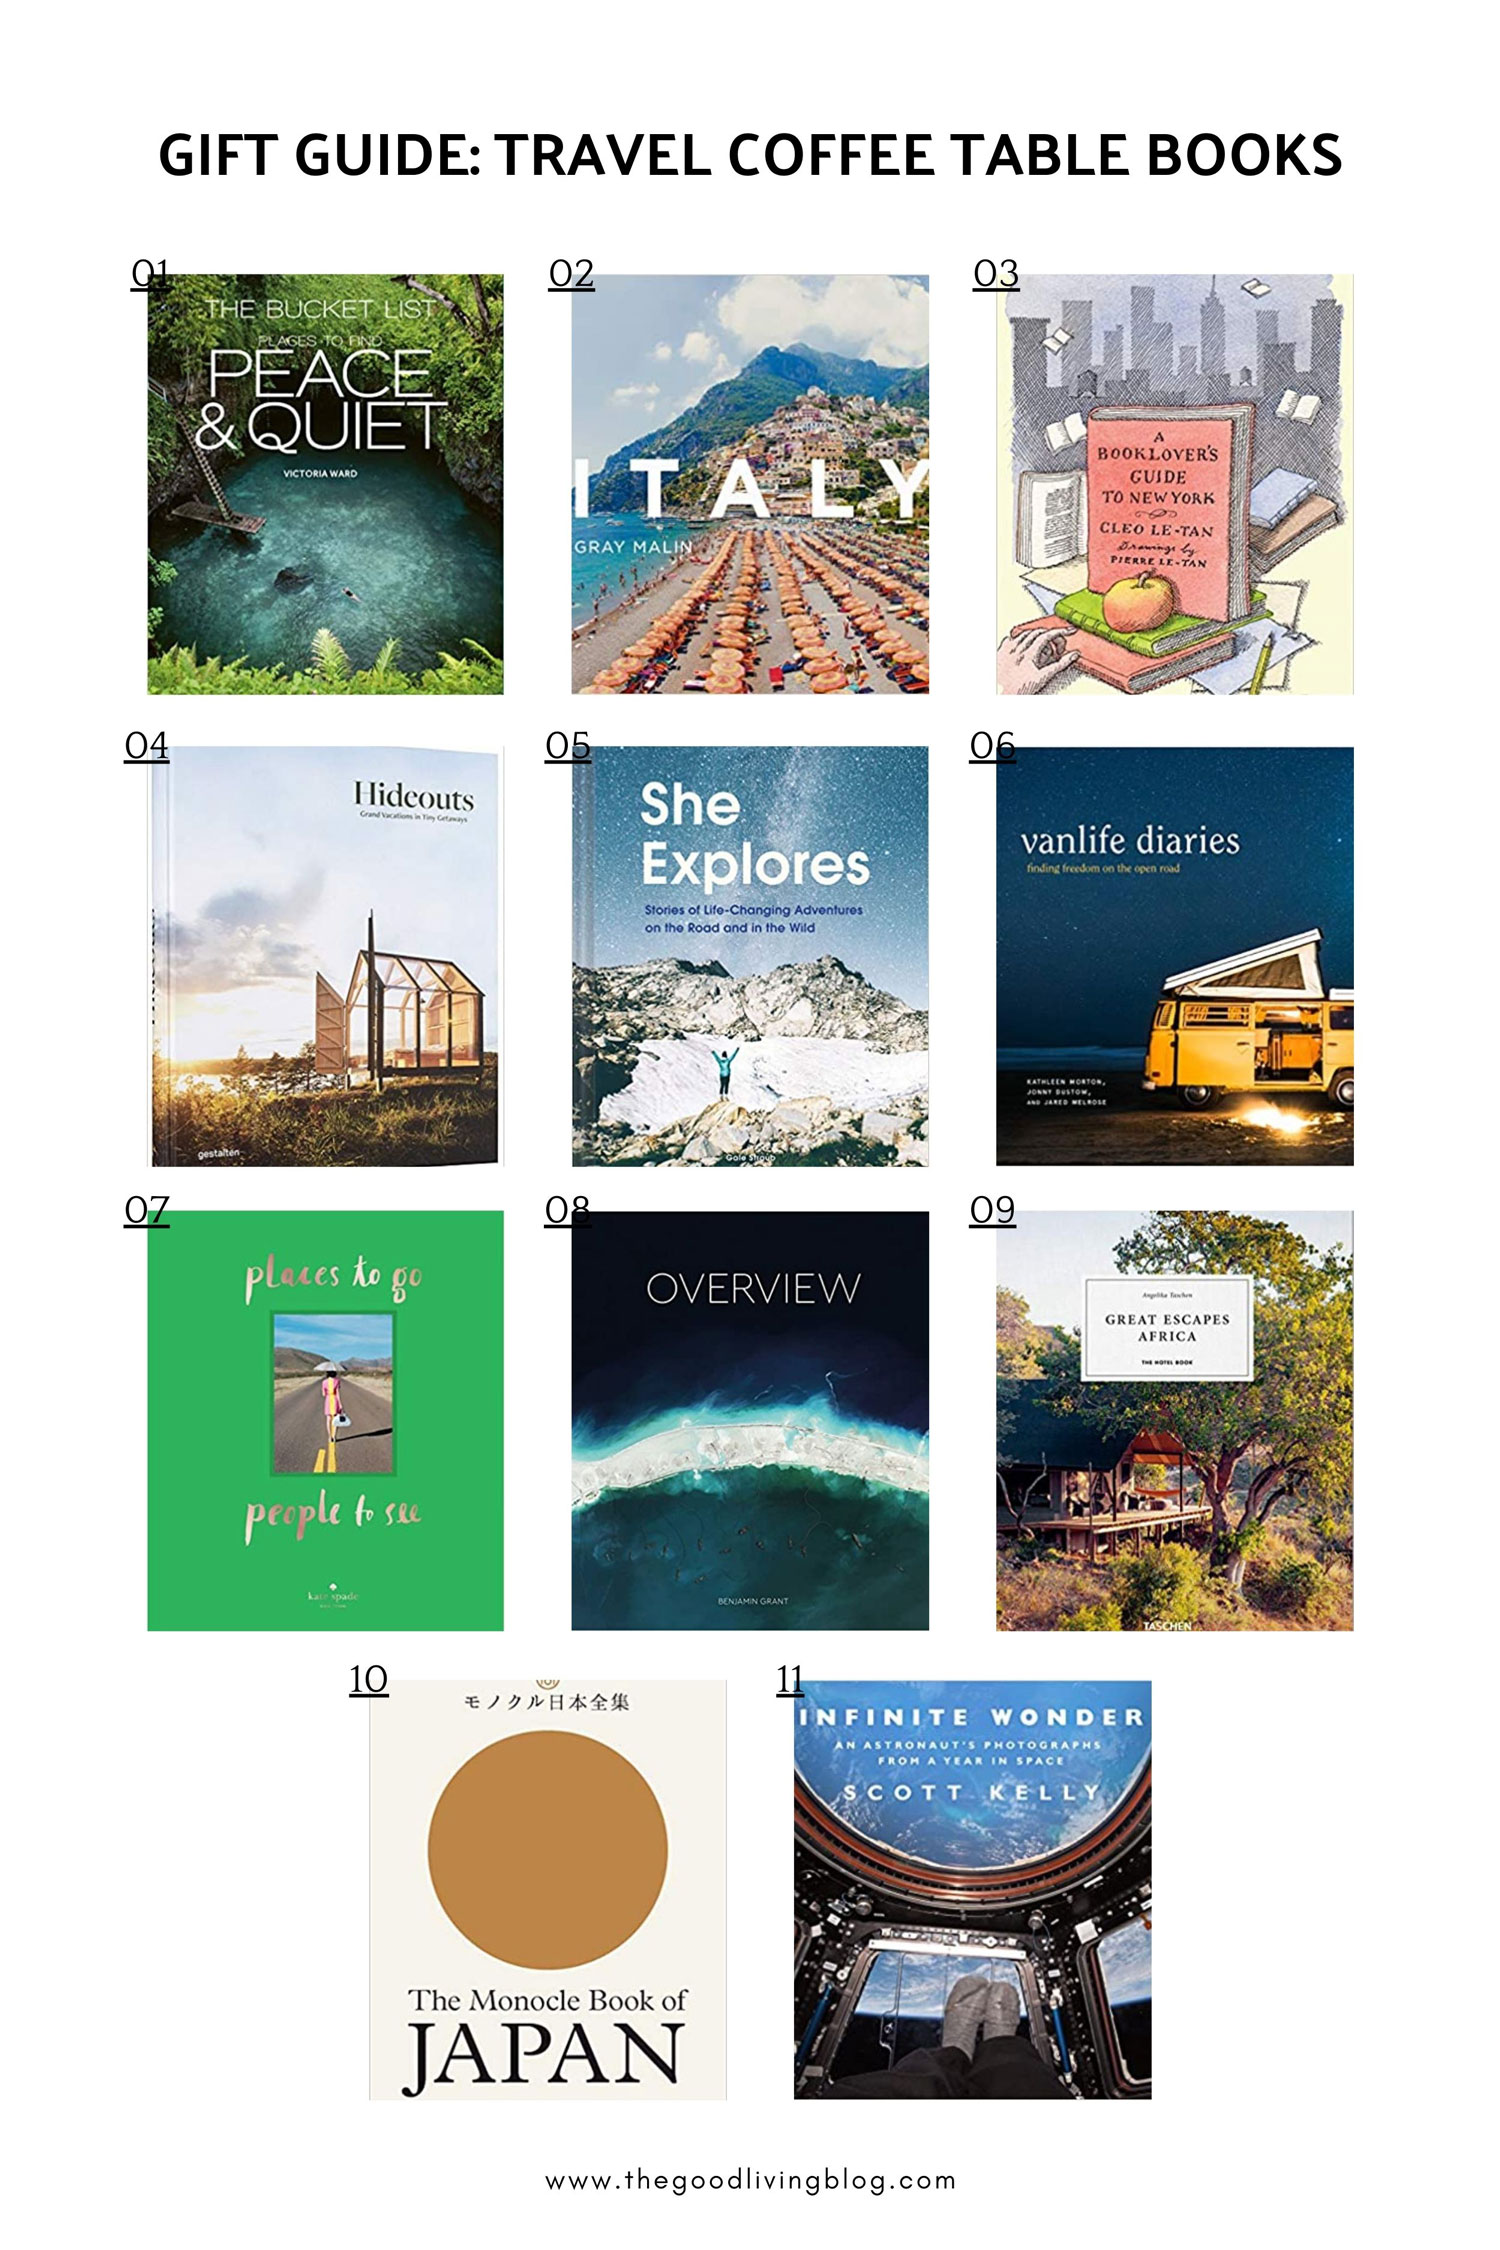 Inspiring Coffee Table Books for Trail and Ultra Runners: Our Top